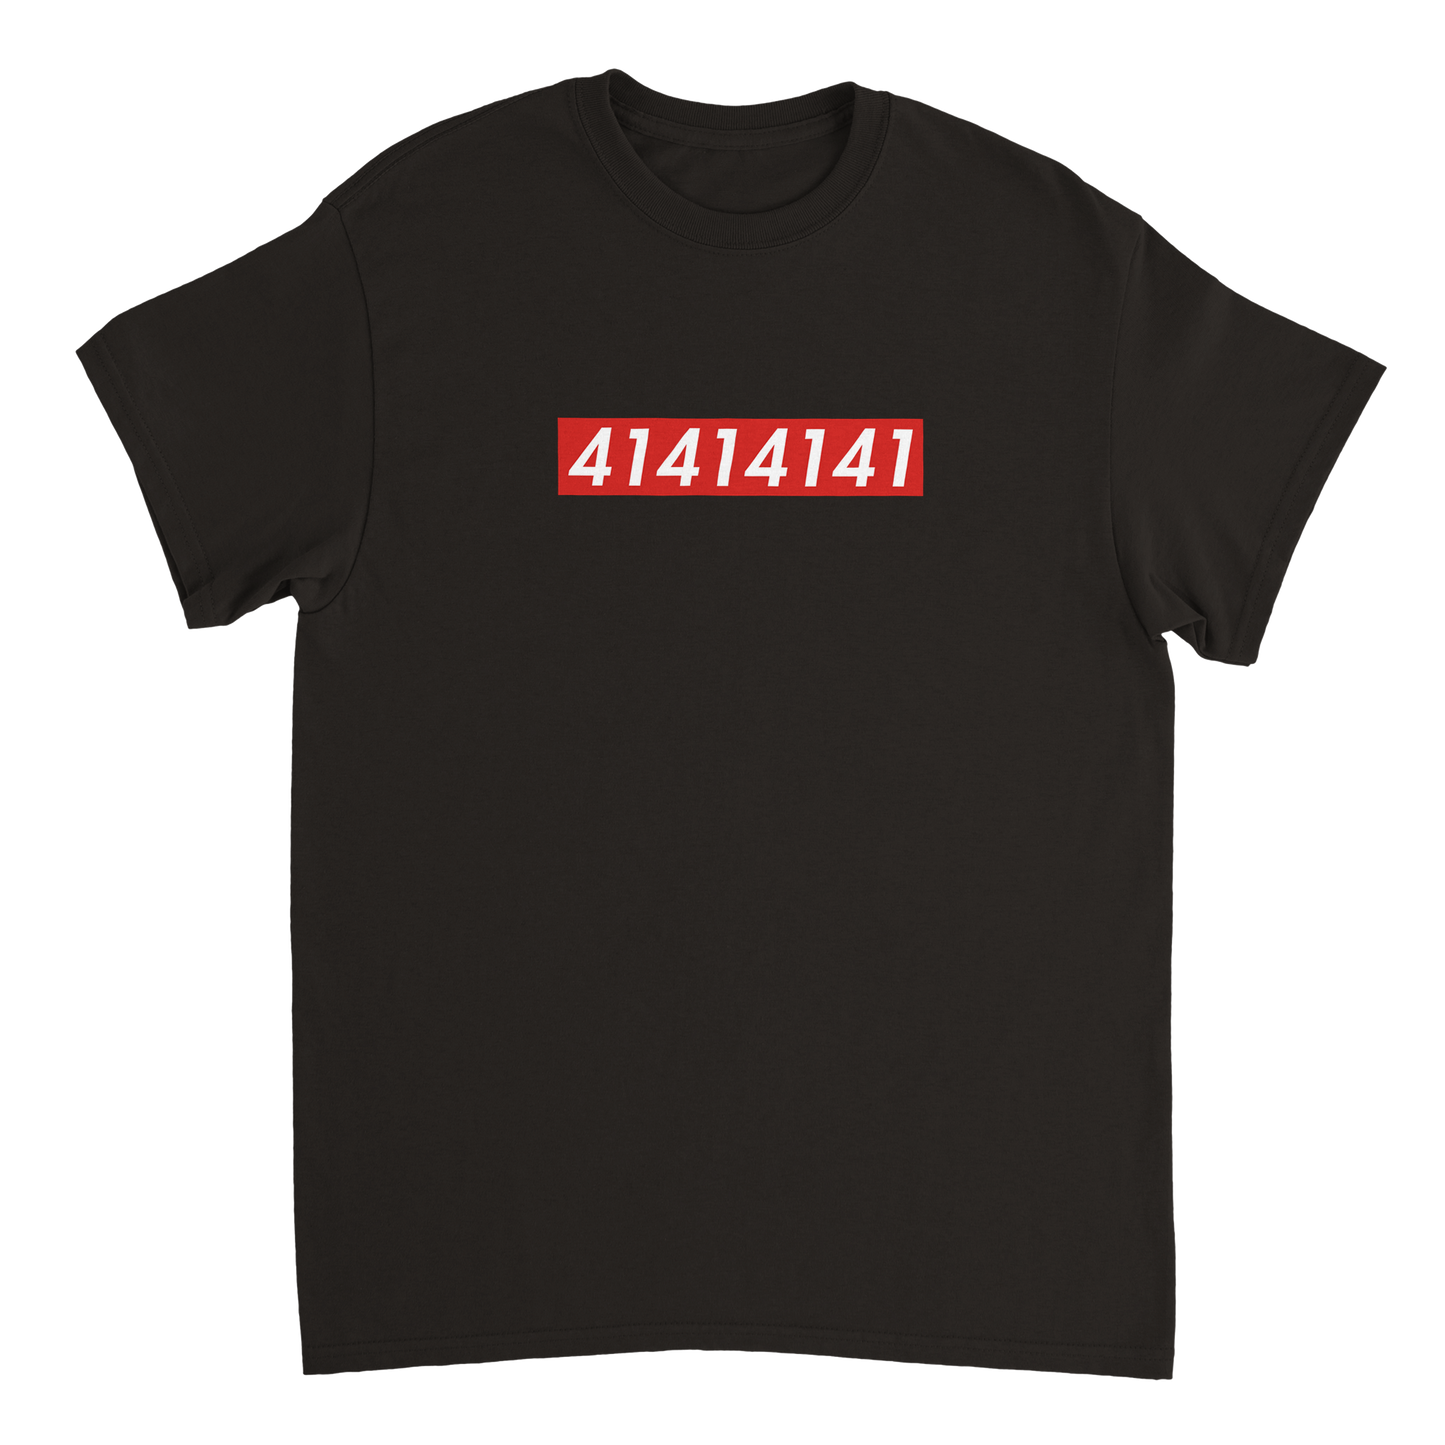 41414141 banner in a trendy style Unisex T-Shirt